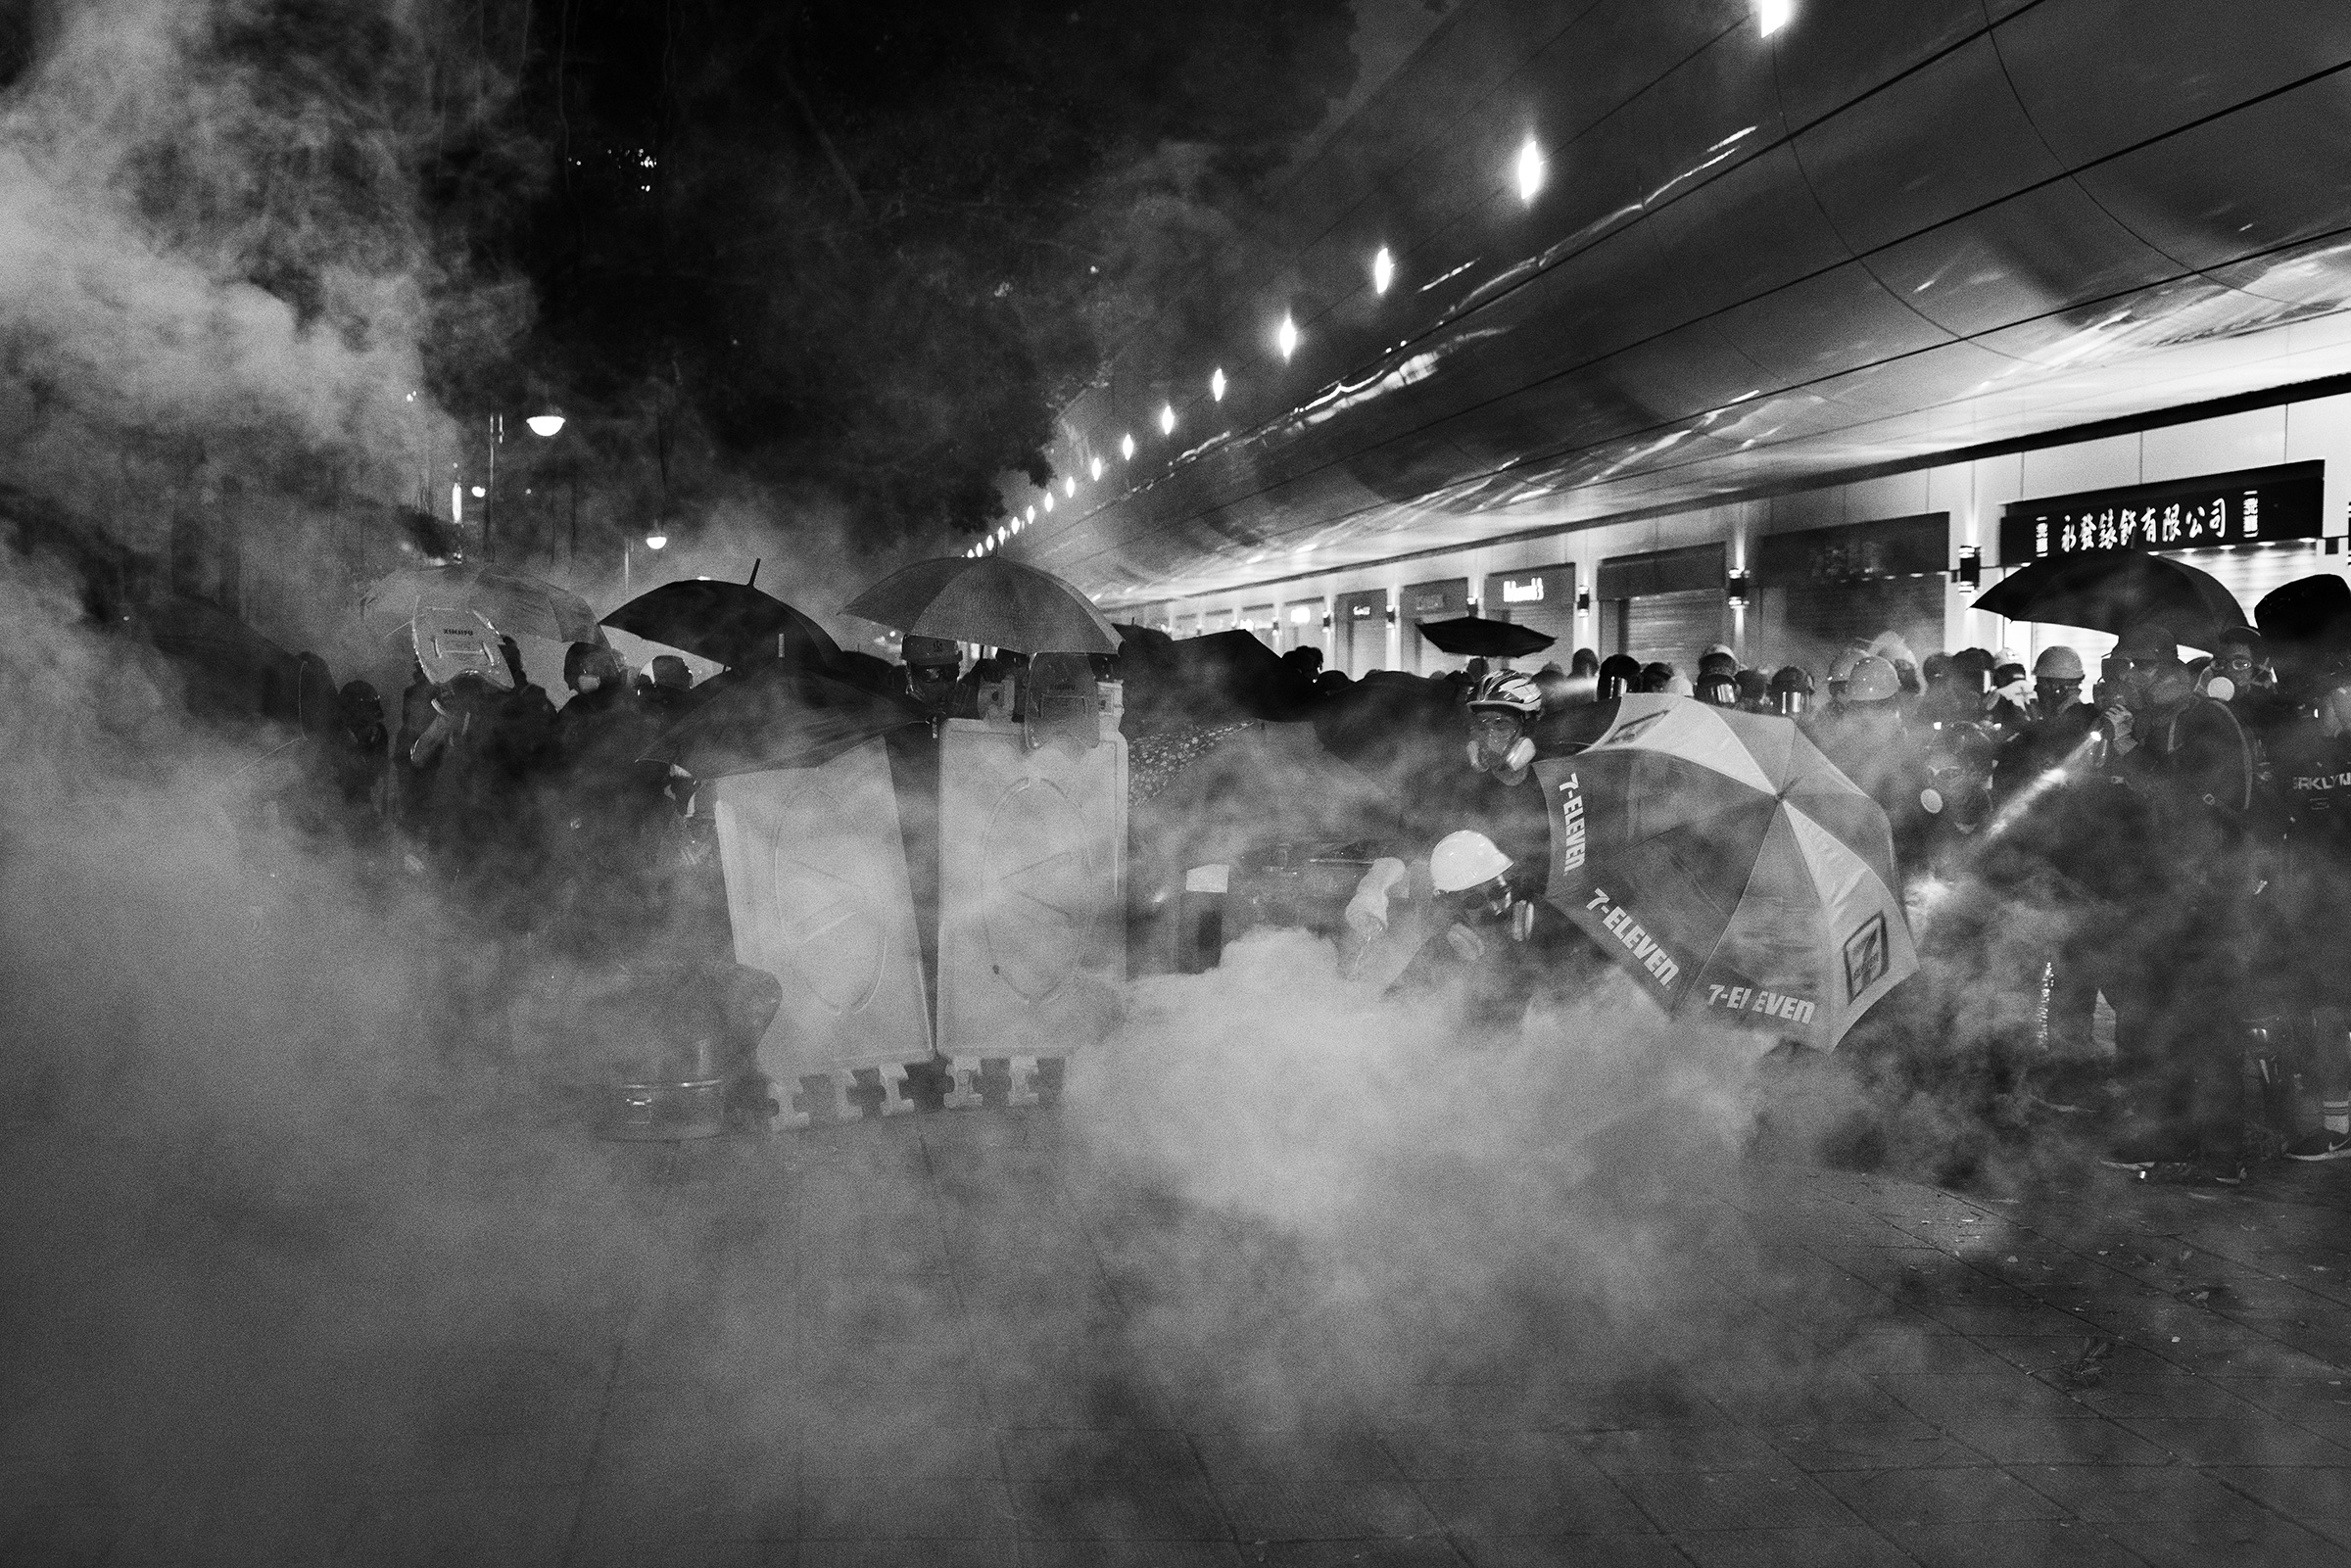 Protesters are tear-gassed by riot police near the Tsim Sha Tsui police station in Kowloon, Hong Kong, on Aug. 11. (Adam Ferguson for TIME)